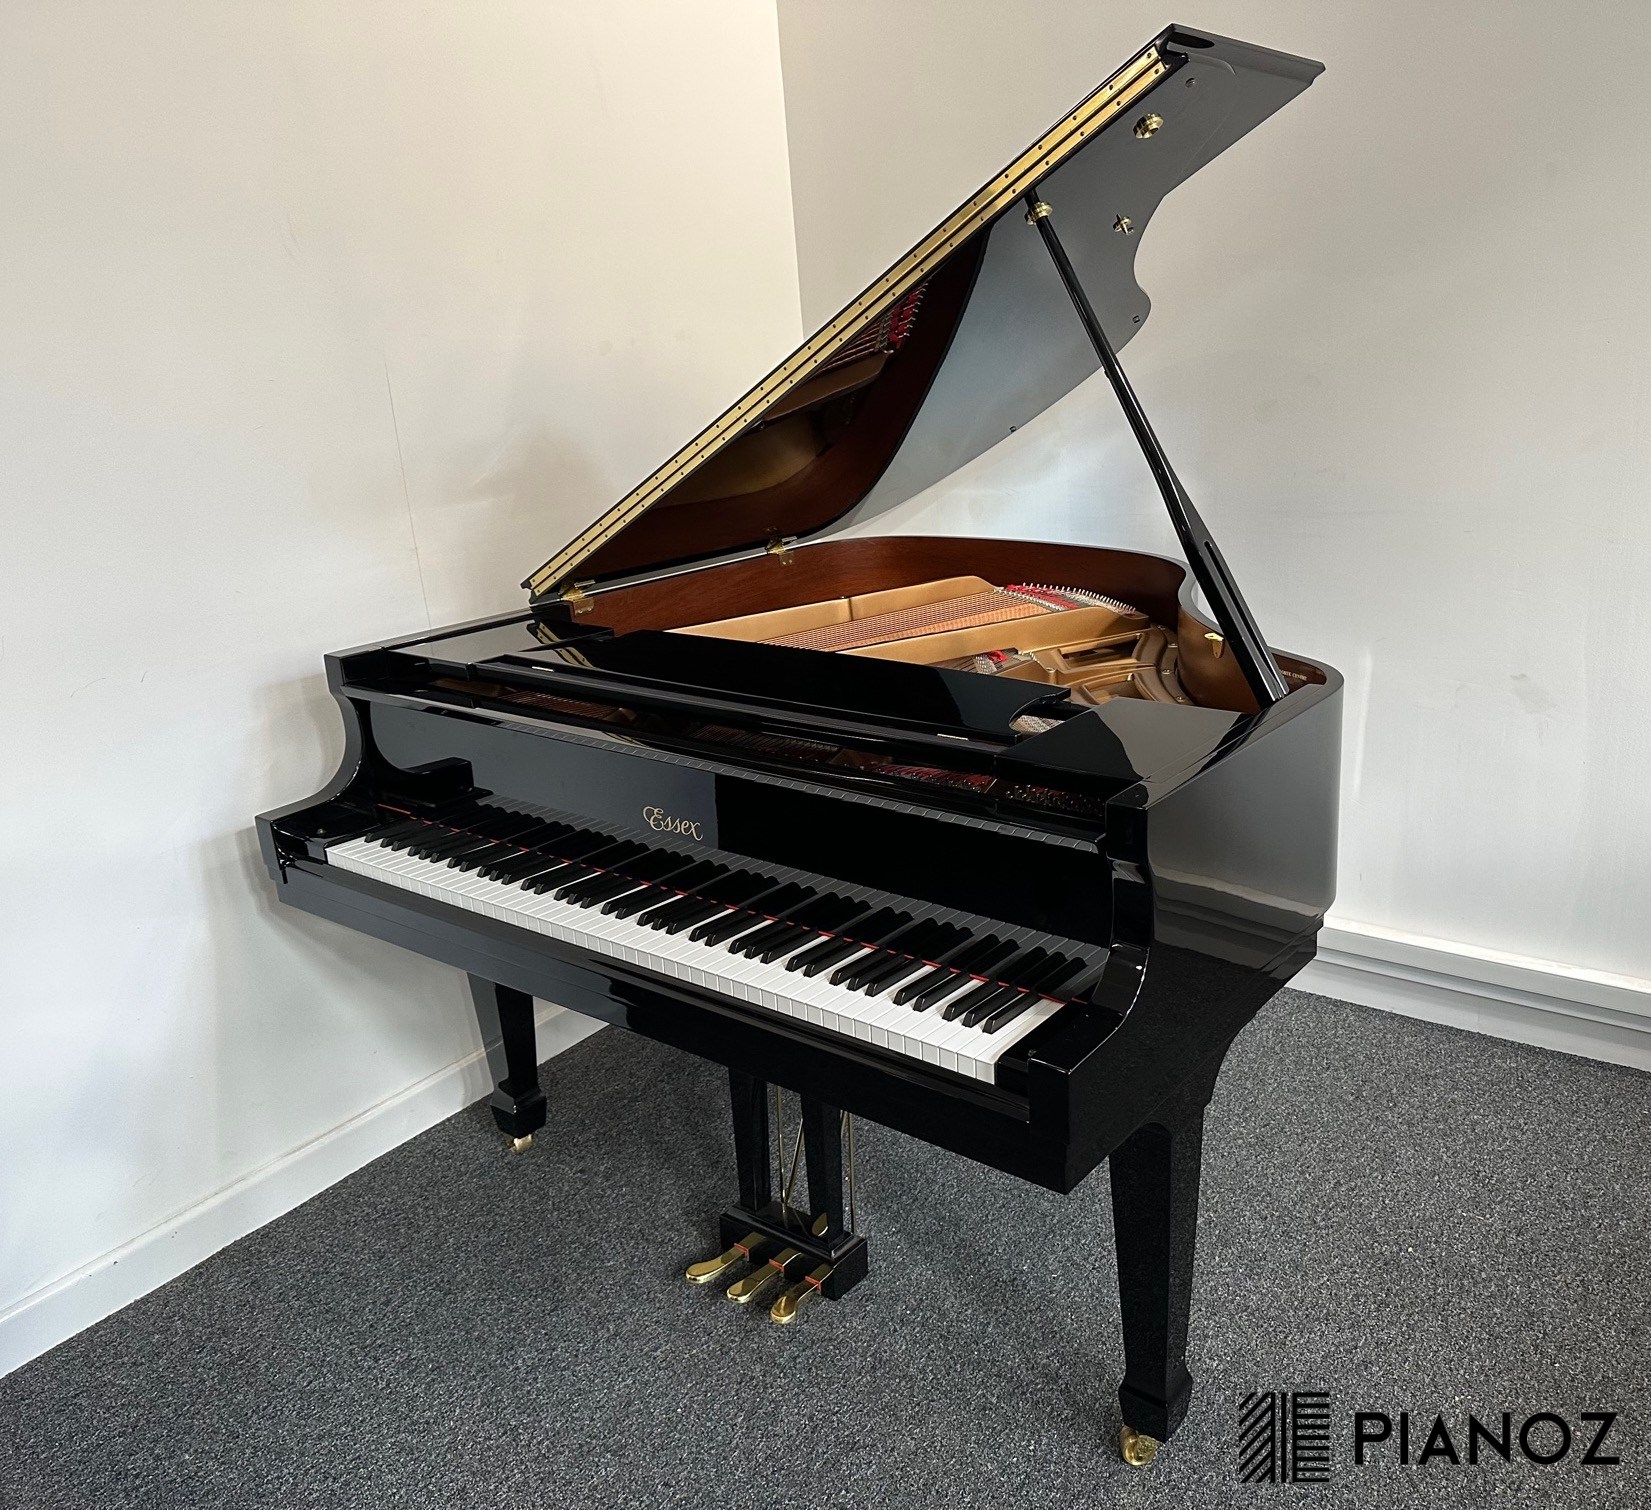 Essex 155 Baby Grand Piano piano for sale in UK